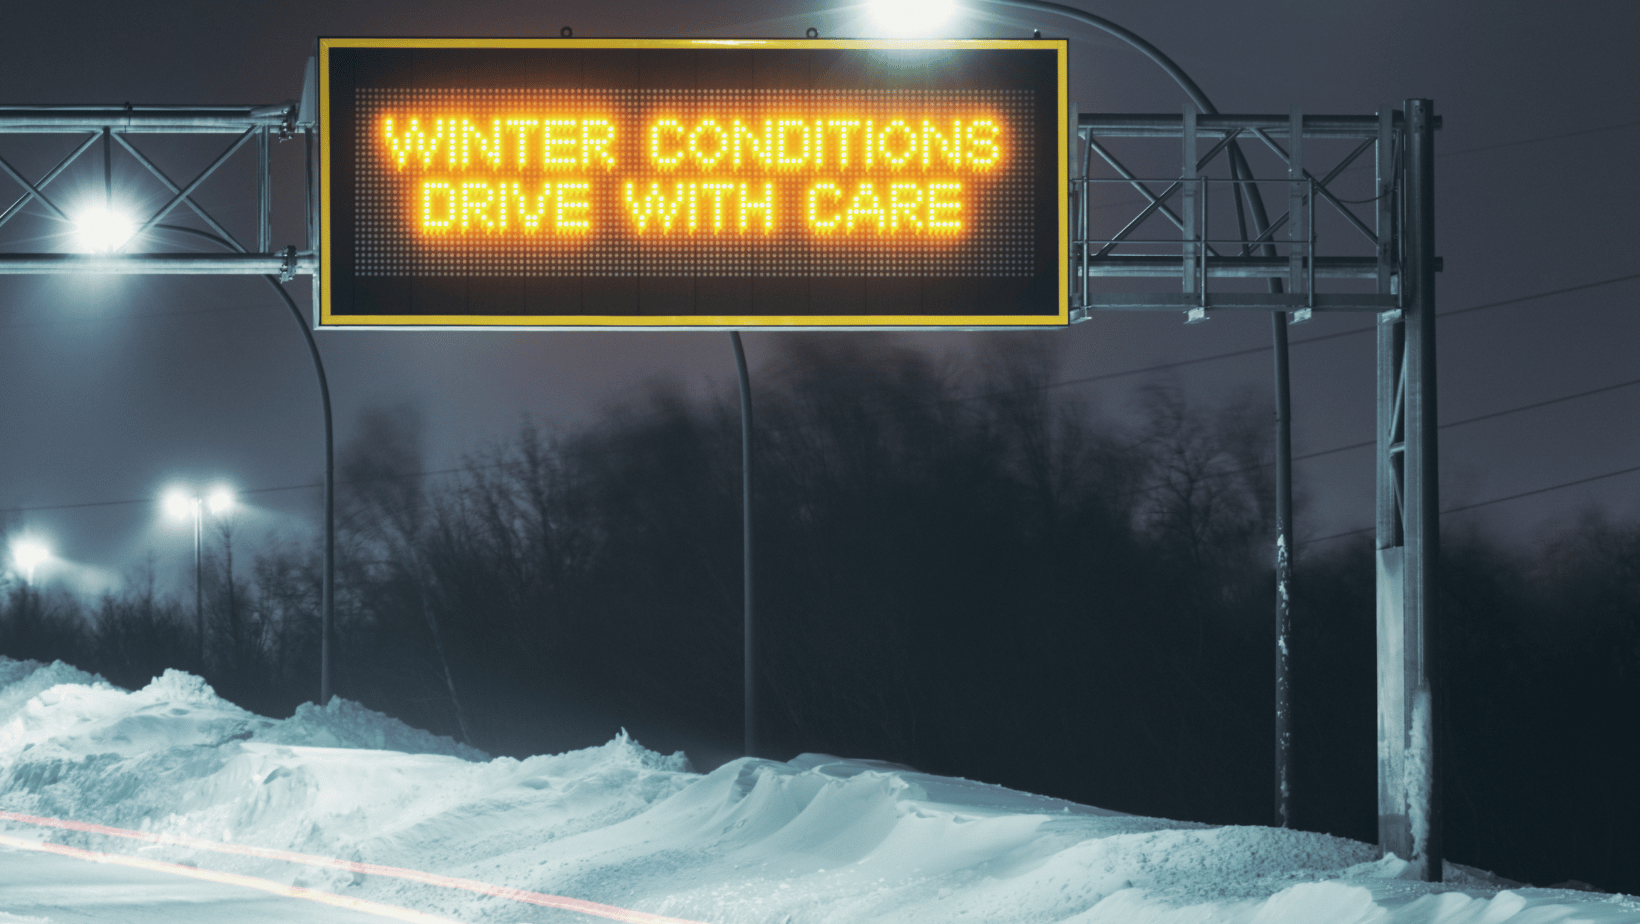 winter road conditions warning sign on roadway